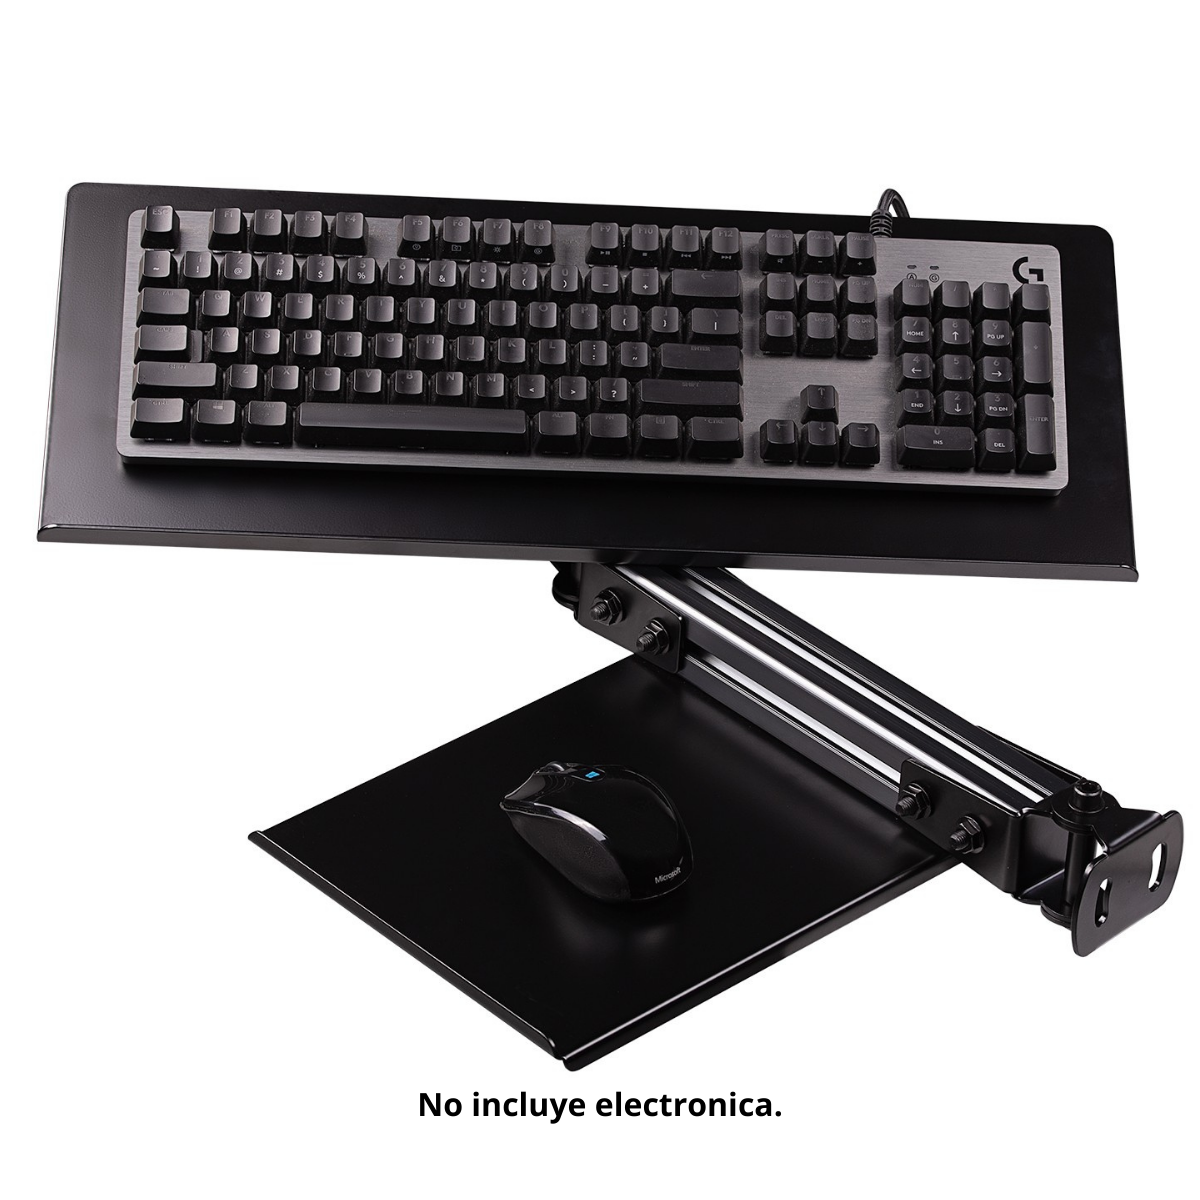 NEXT LEVEL MOUSE RACING KEYBOARD NLR-E010 TRAY & ELITE